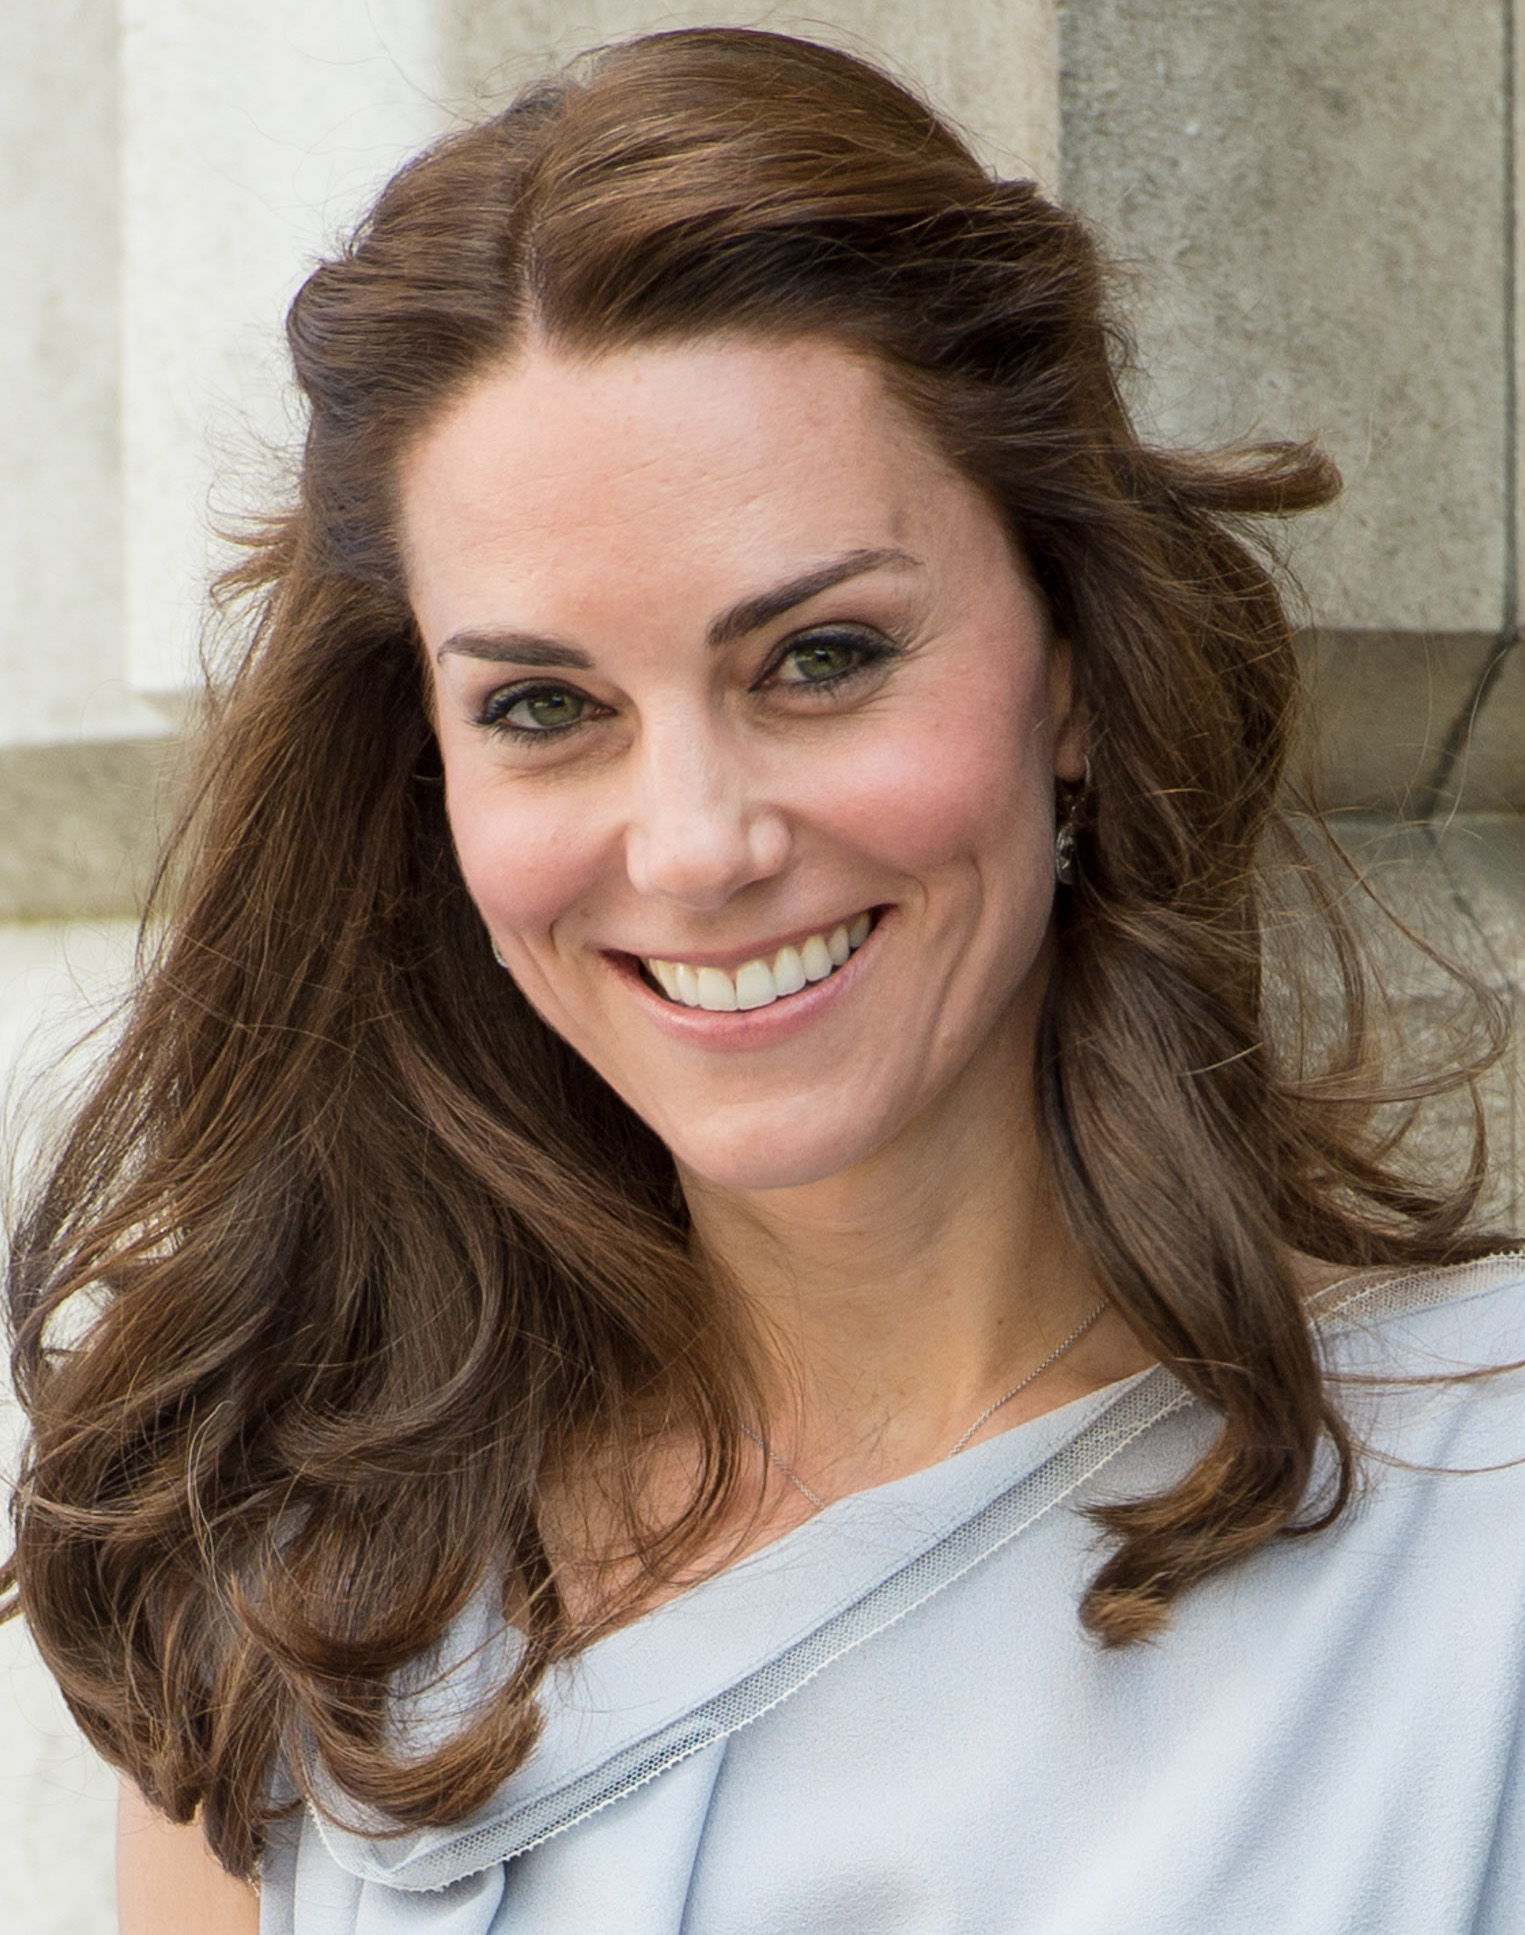 Kate Middleton's Biggest Beauty Secrets You'll Want to Try